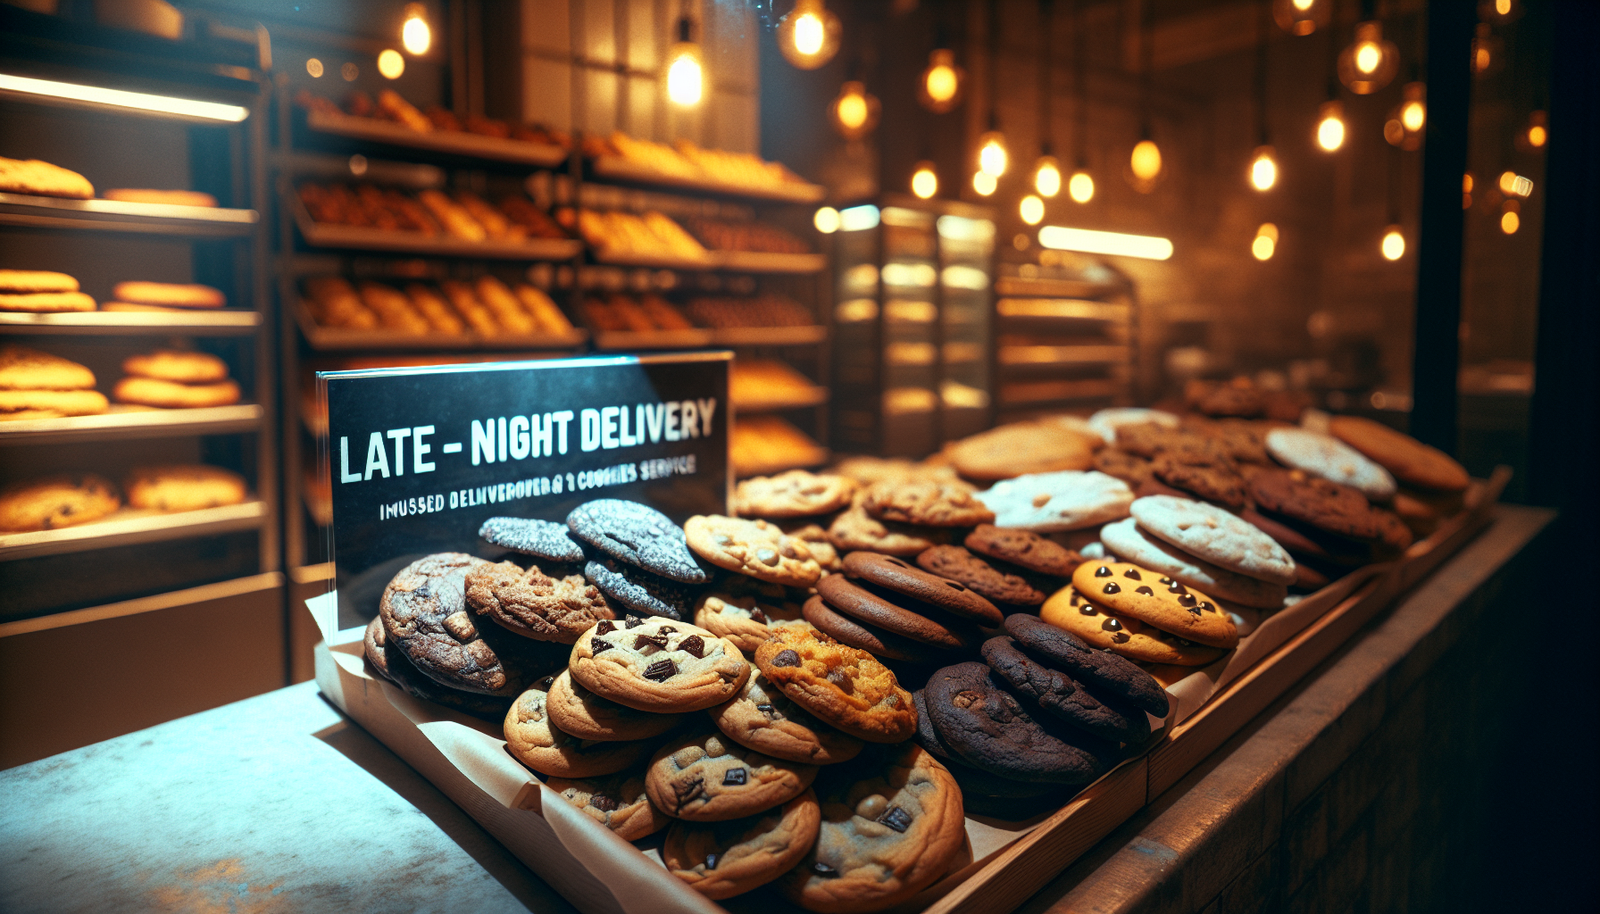 The Insomnia Cookie Experience in Ithaca